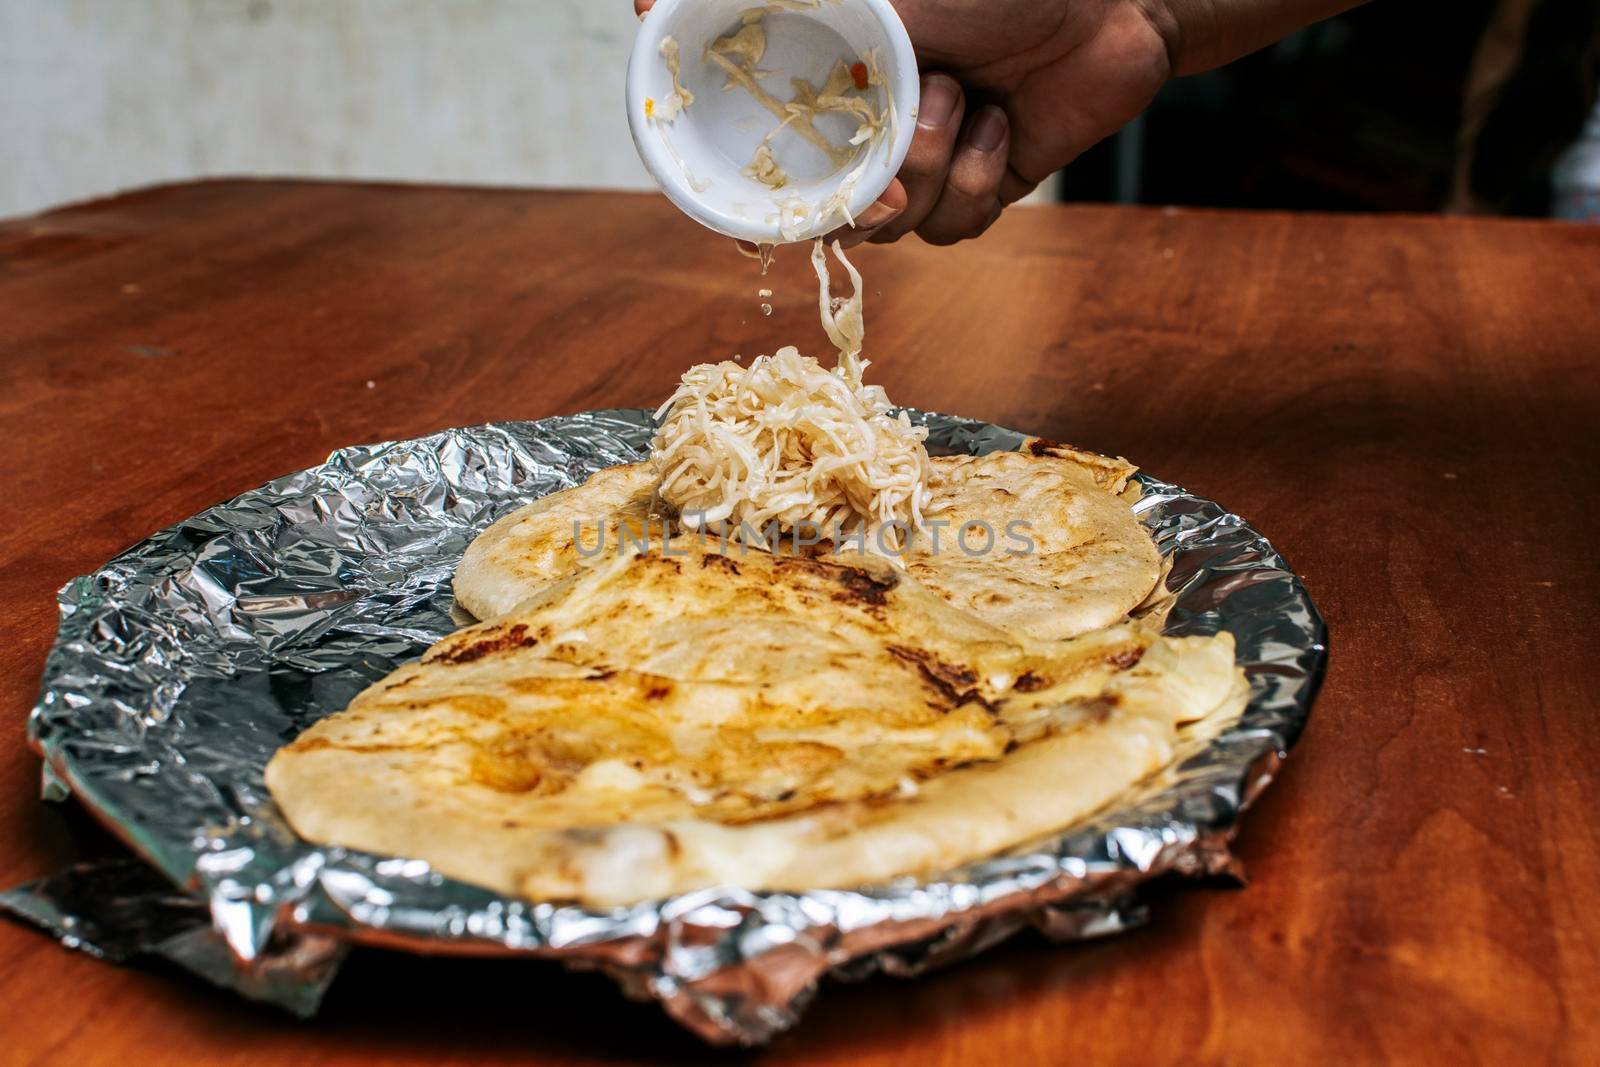 Traditional pupusas served with salad on the table. Nicaraguan pupusas with salad on aluminum foil, View of delicious Salvadoran pupusas served on wooden table. by isaiphoto